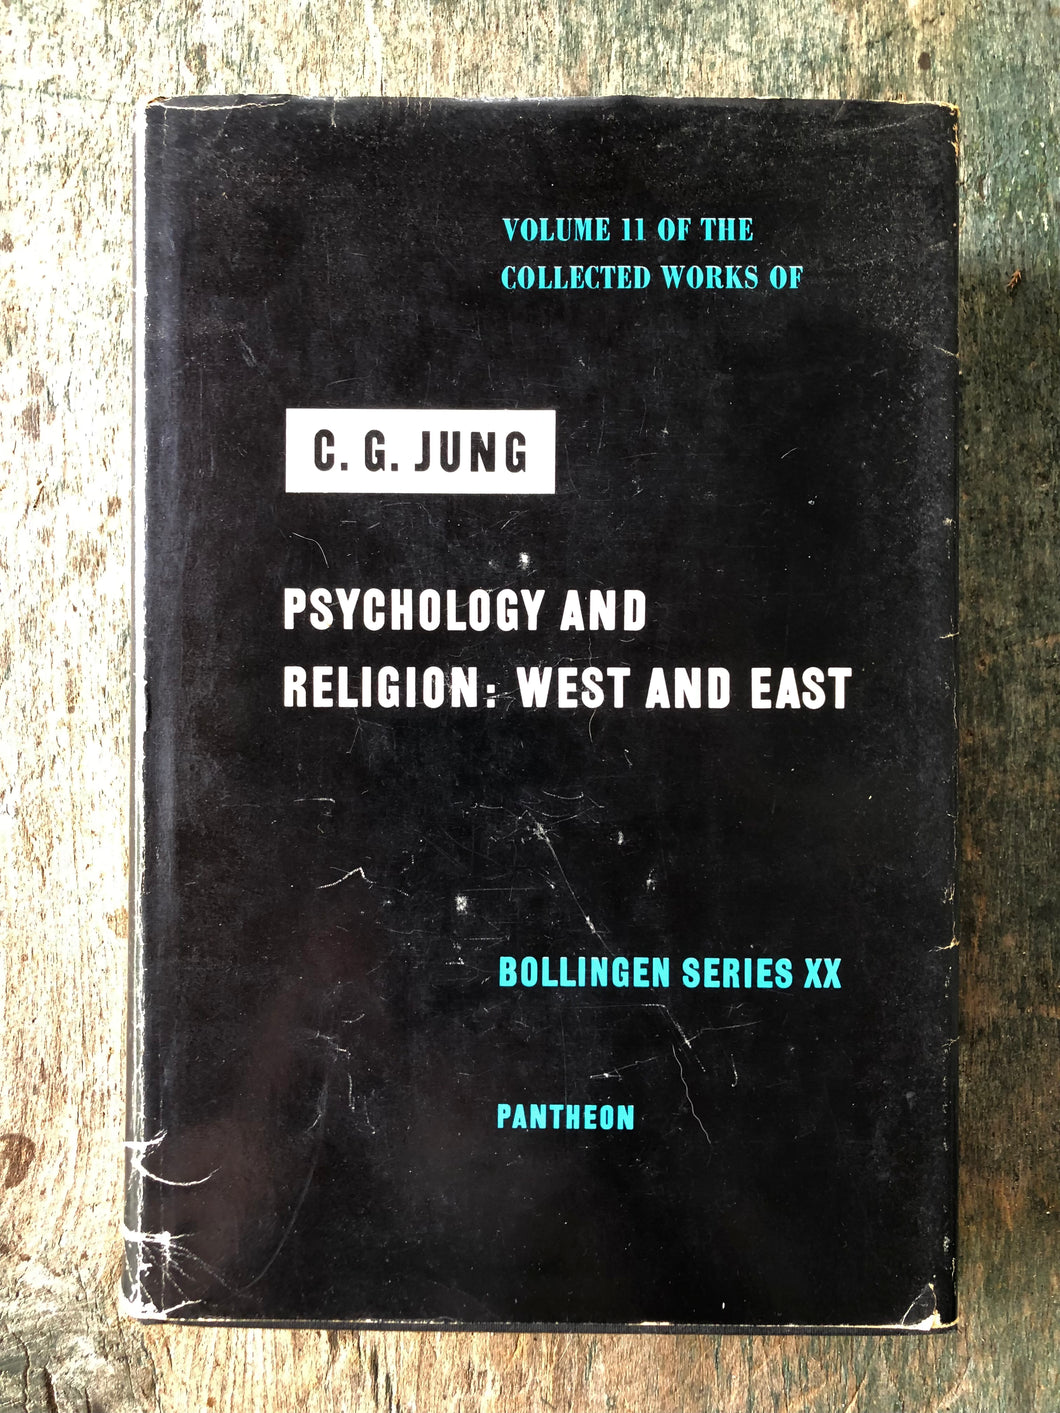 Psychology and Religion: West and East by C. G. Jung